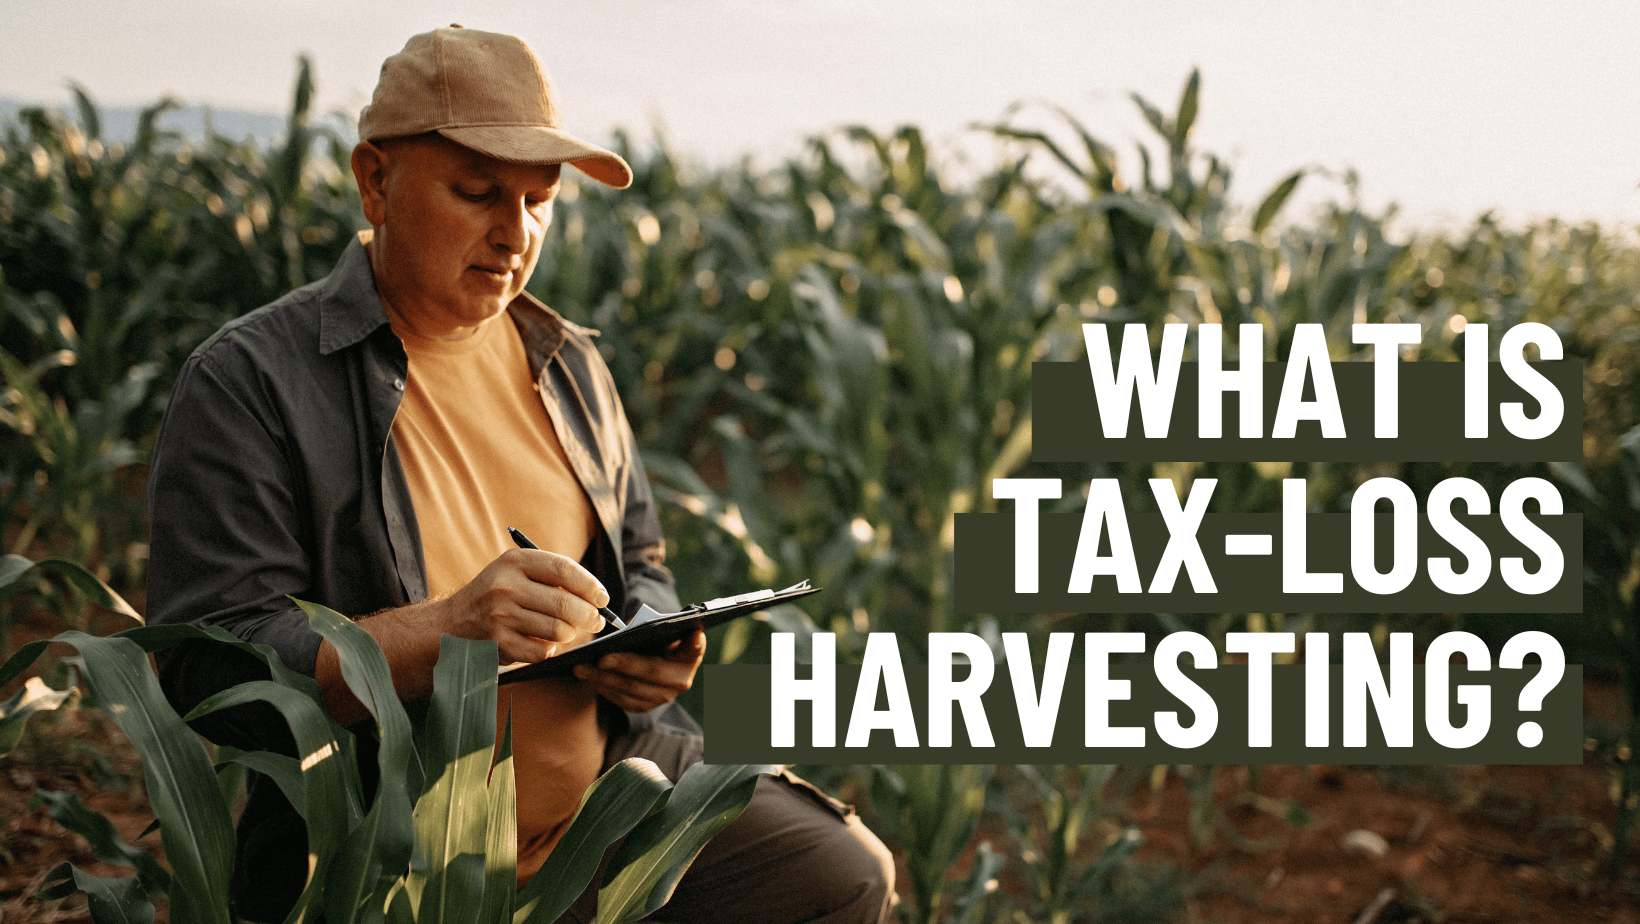 Man in field with text: What is tax-loss harvesting?